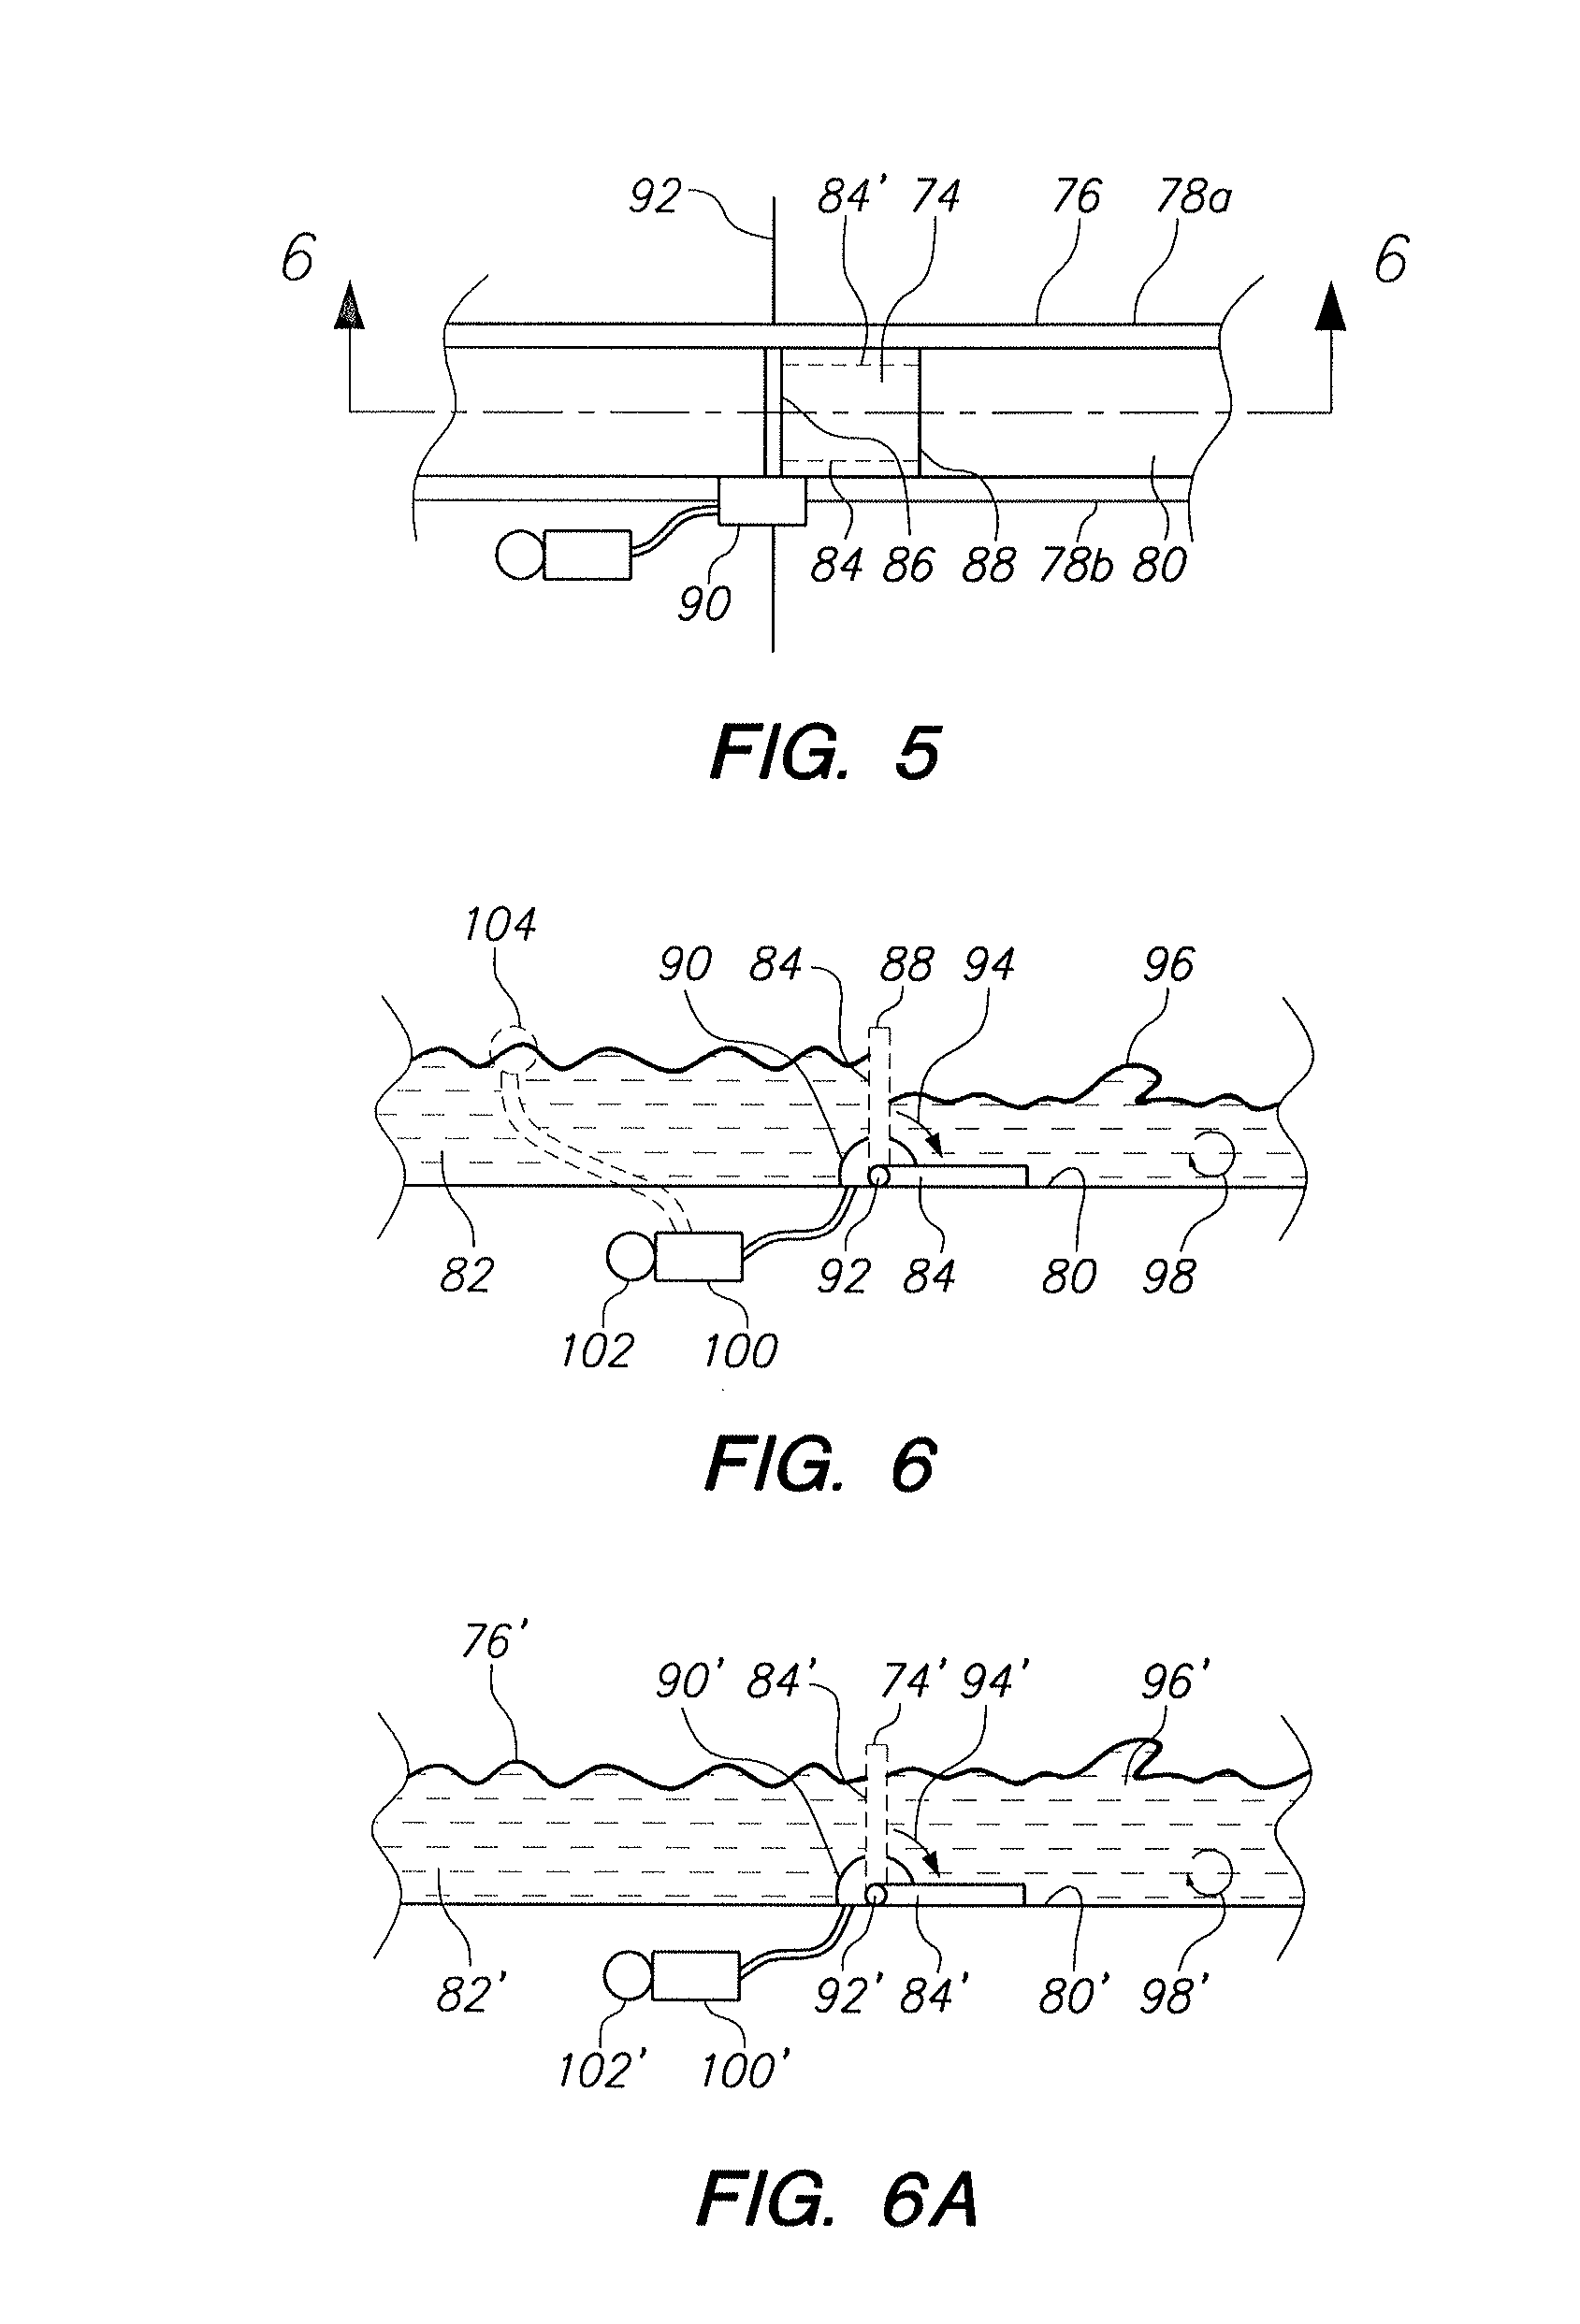 System and Method for Using a Pulse Flow Circulation for Algae Cultivation